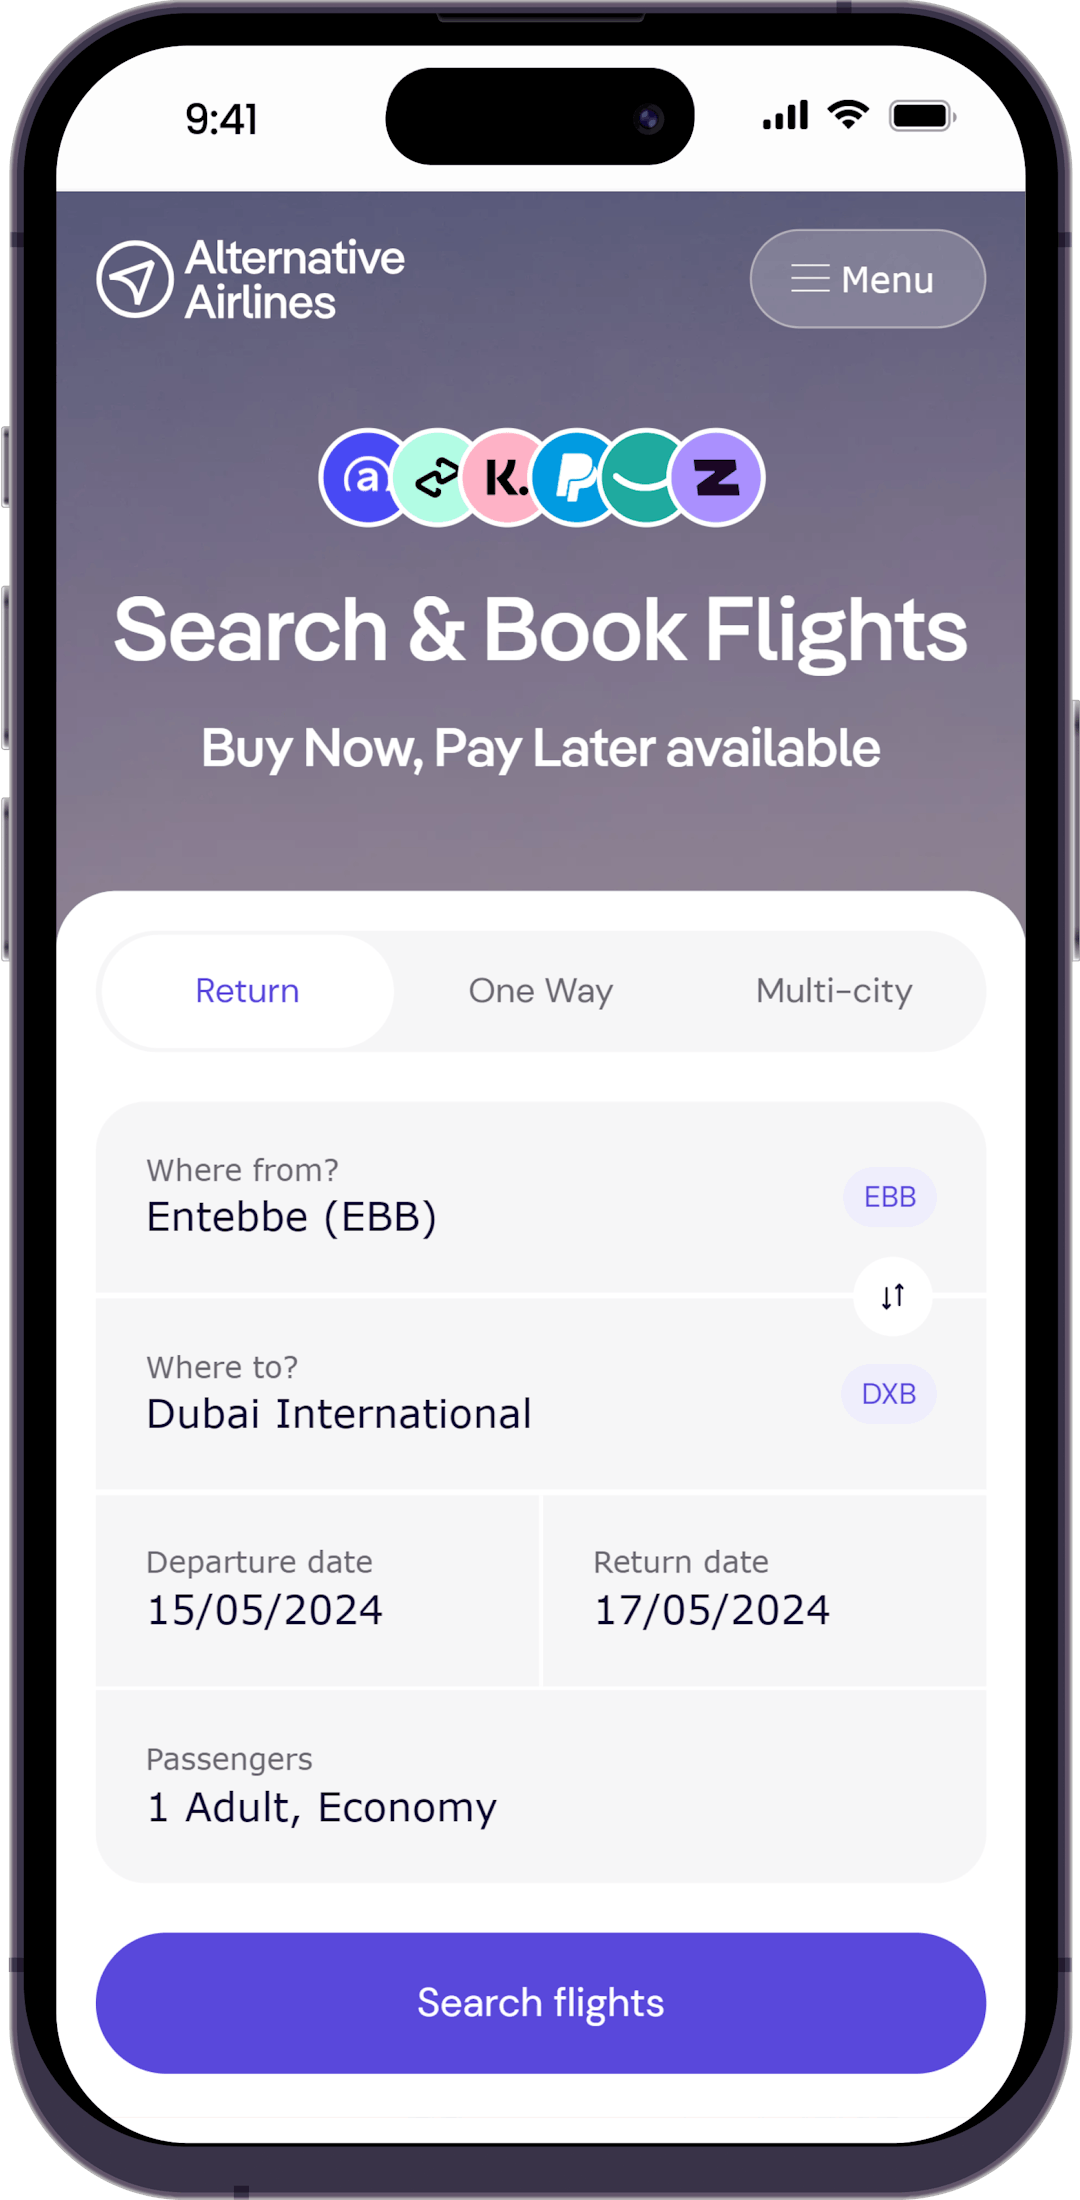 Step 1 - Search for flights